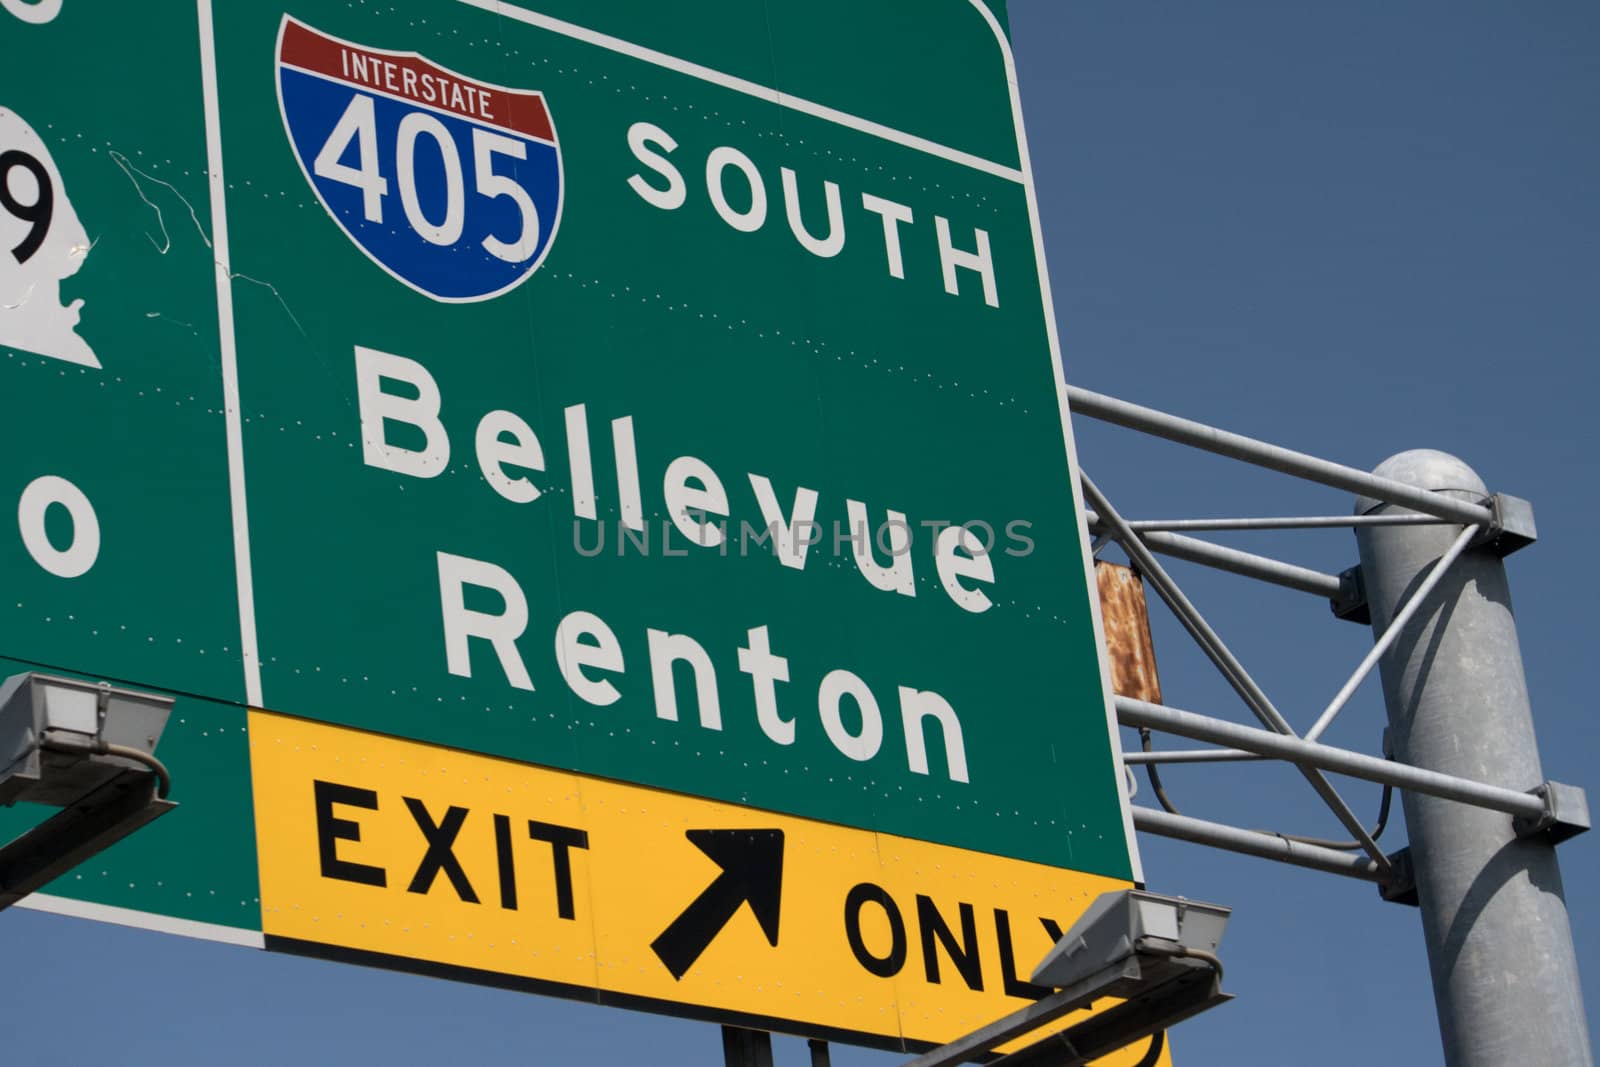 Interstate 405 South Bellevue Renton Exit part of the highway system in Washington State near Seattle.